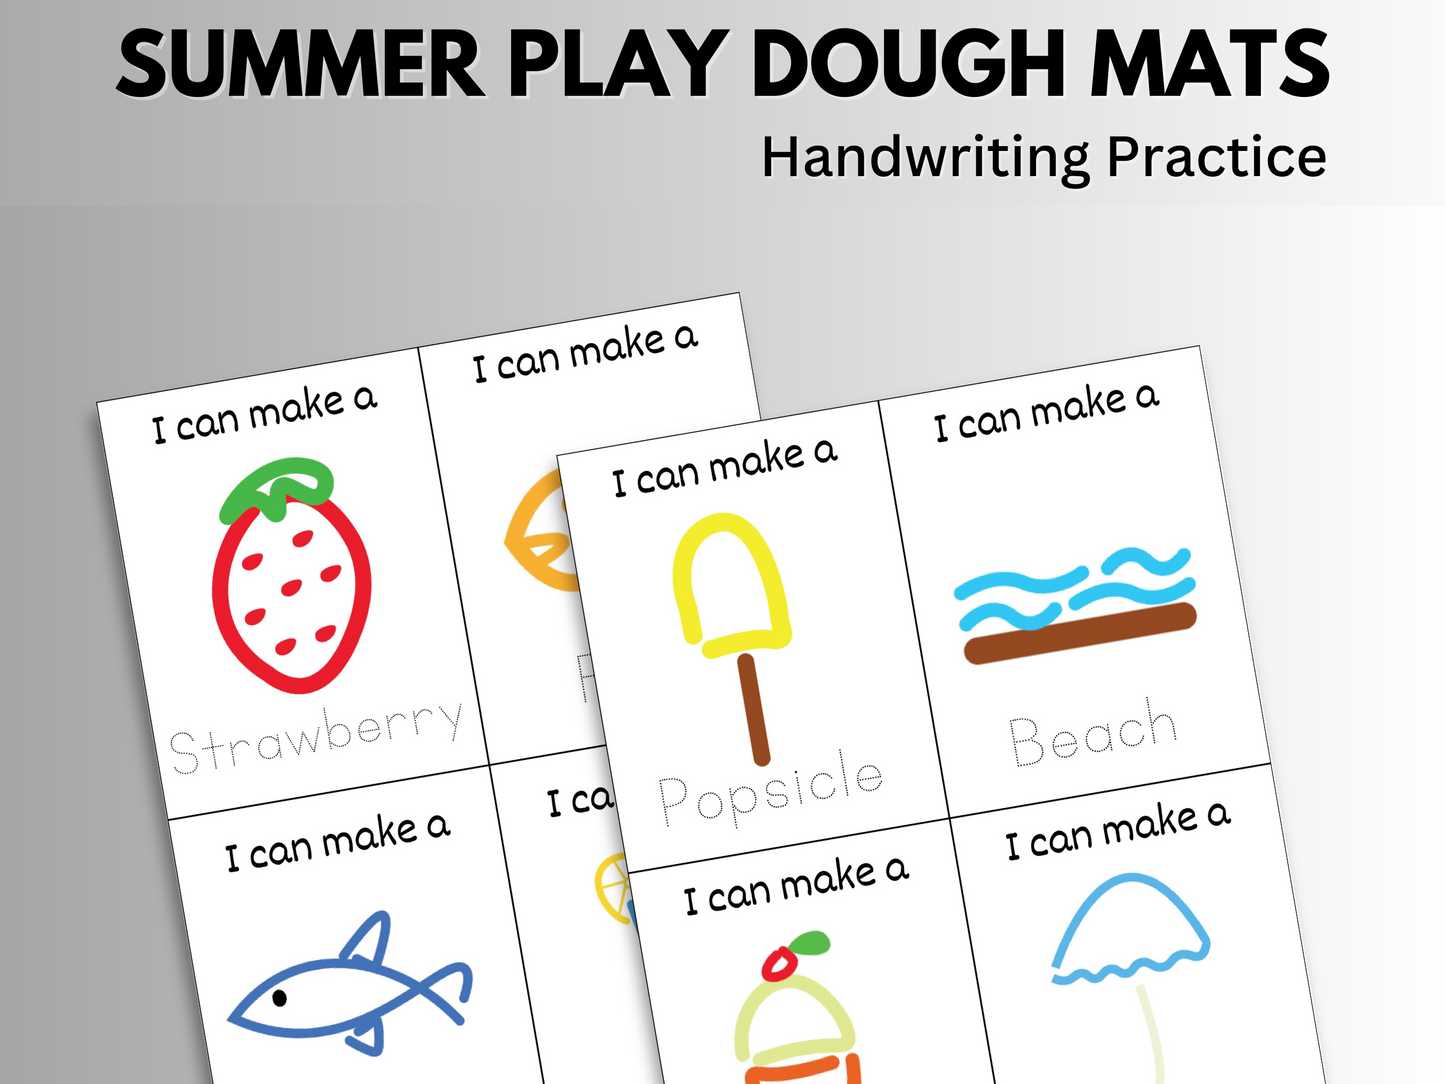 Summer play dough mats handwriting practice.  Showing 8 different designs.